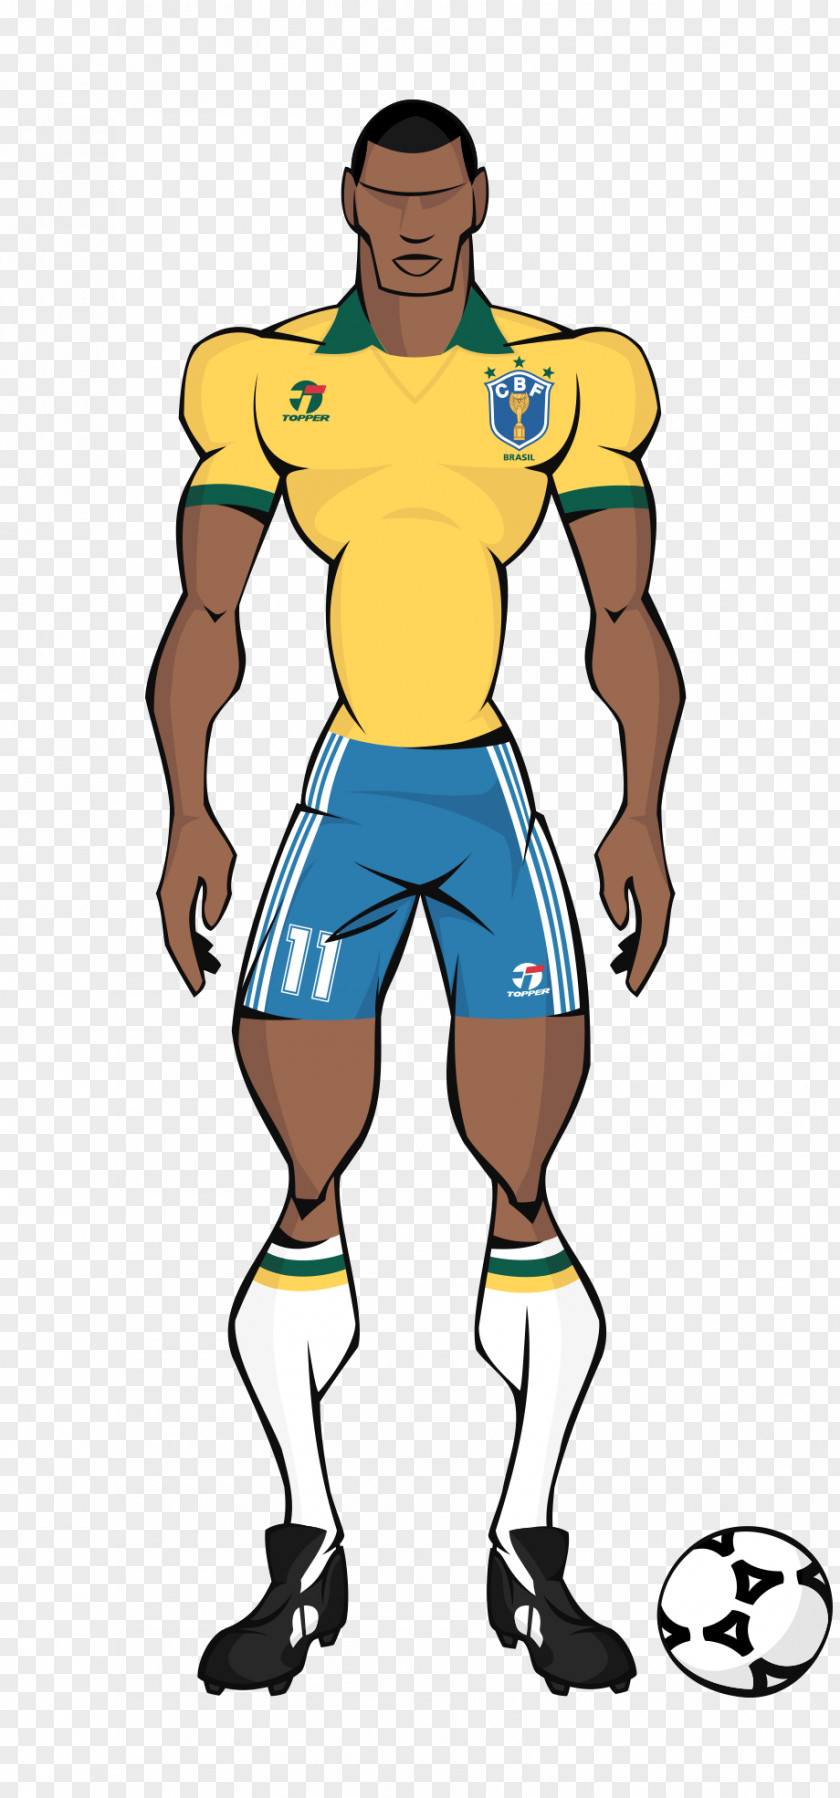 Brazil National Football Team Ricardo Gomes At The 1990 FIFA World Cup 1994 PNG